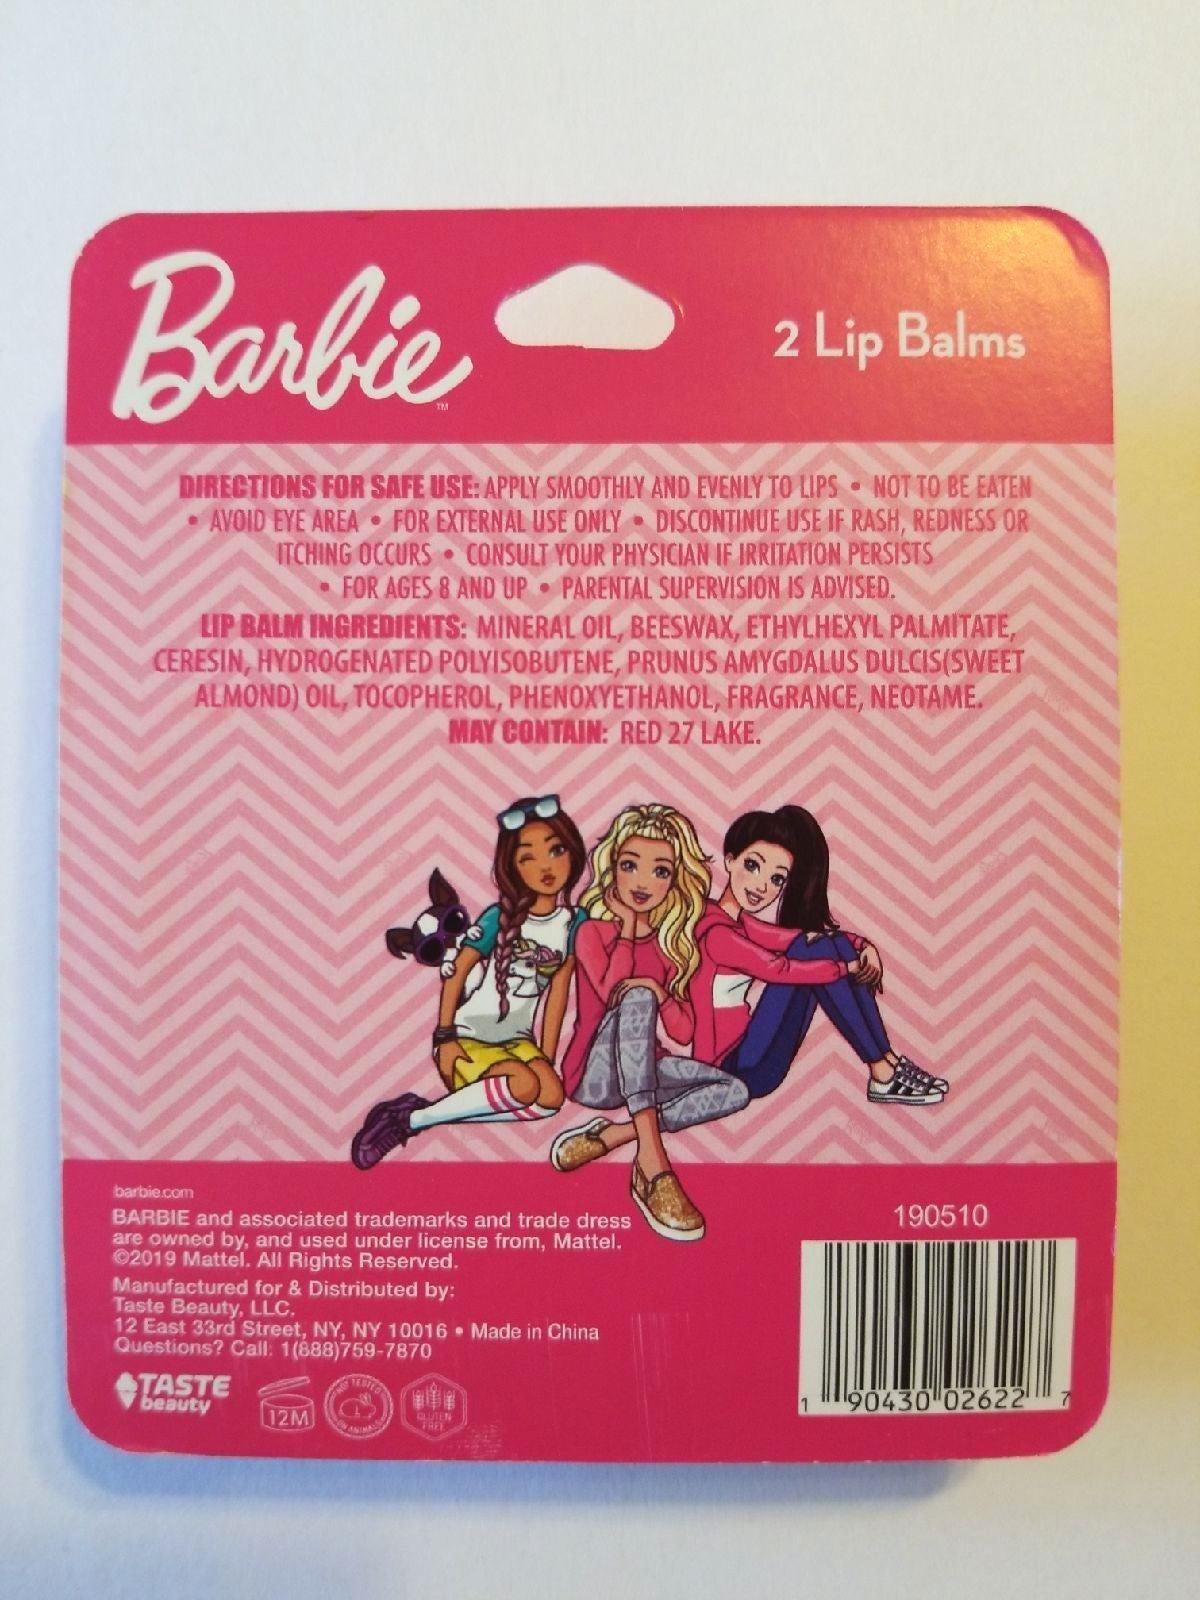 Barbie Pink Lip Balm - Set of Two Sweet Flavors